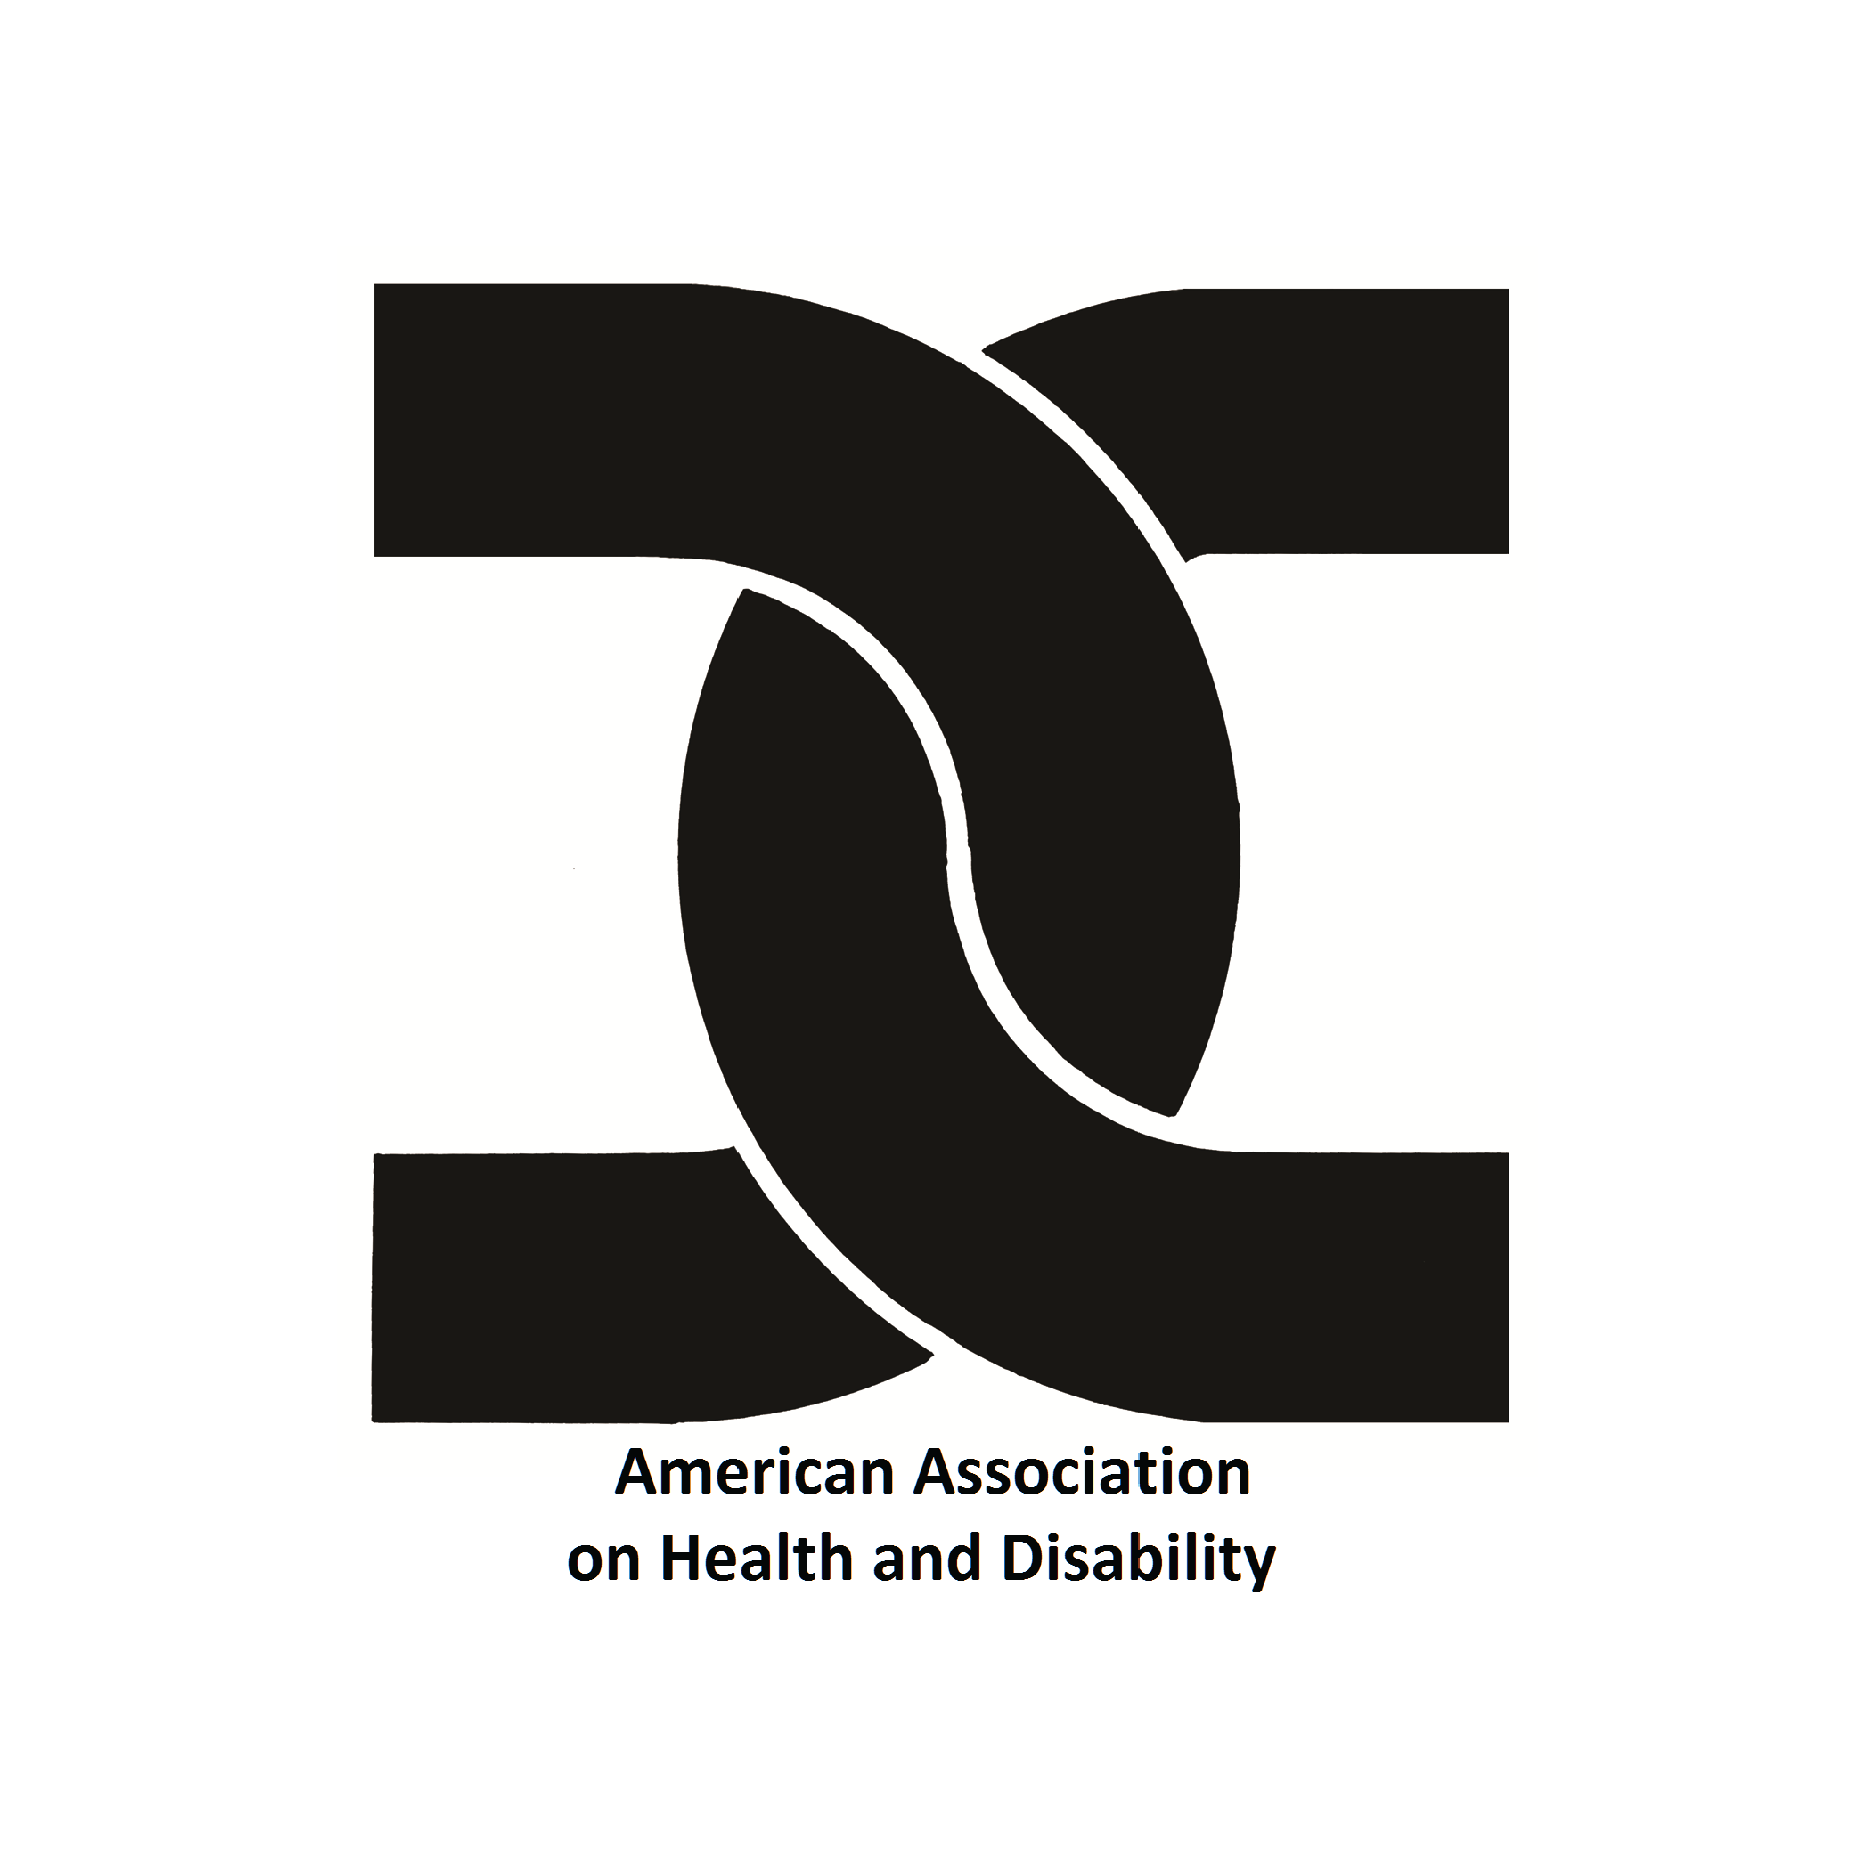 American Association on Health and Disability